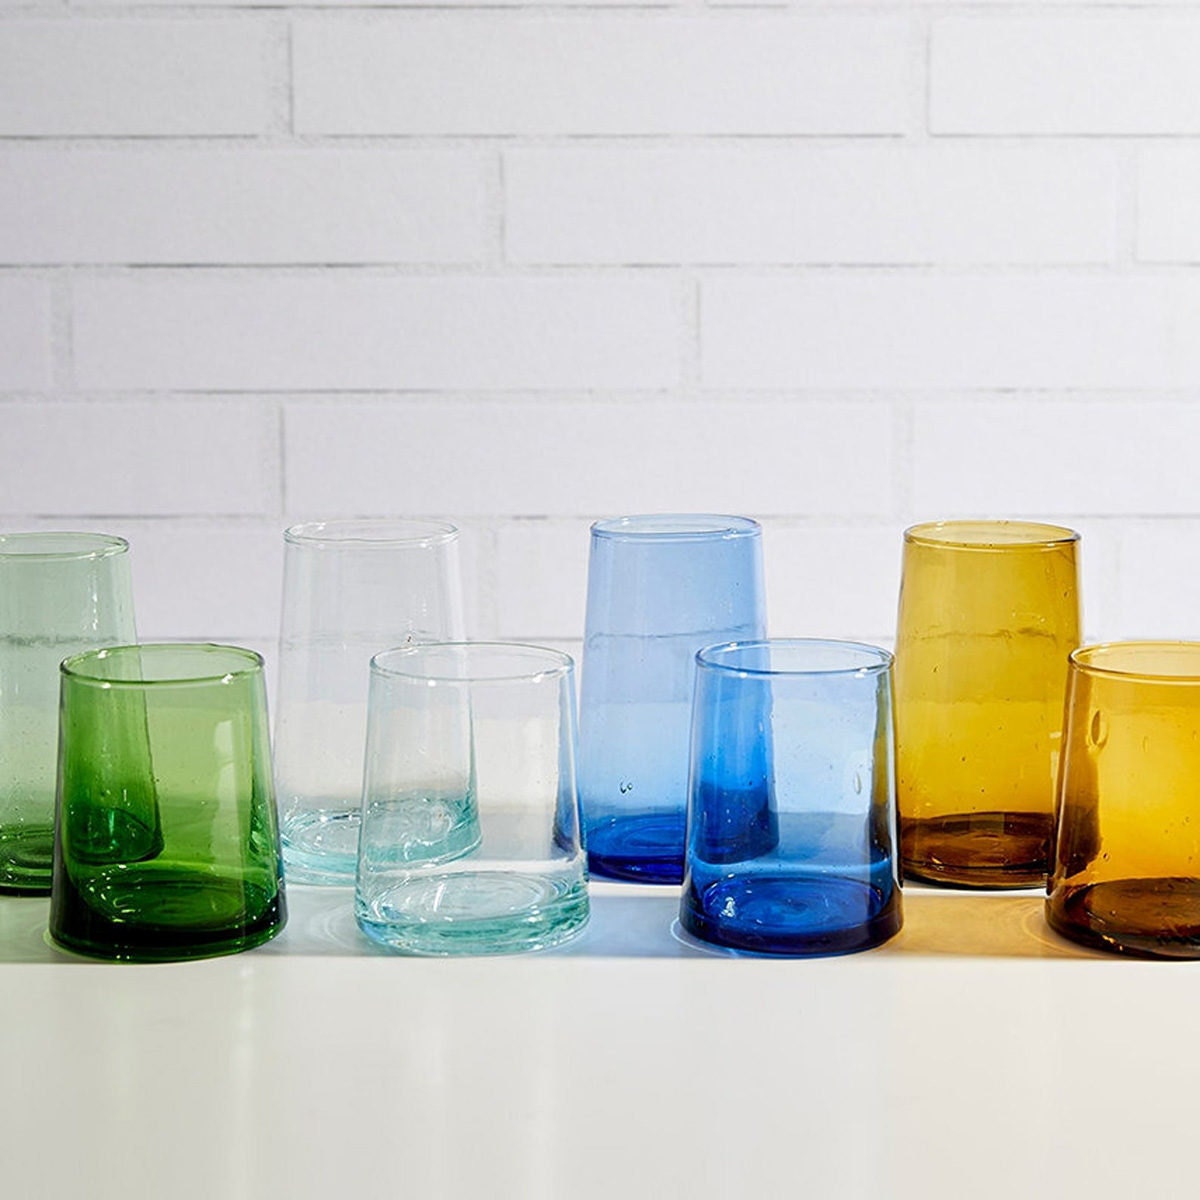 Eight glasses in green, clear, blue, and amber